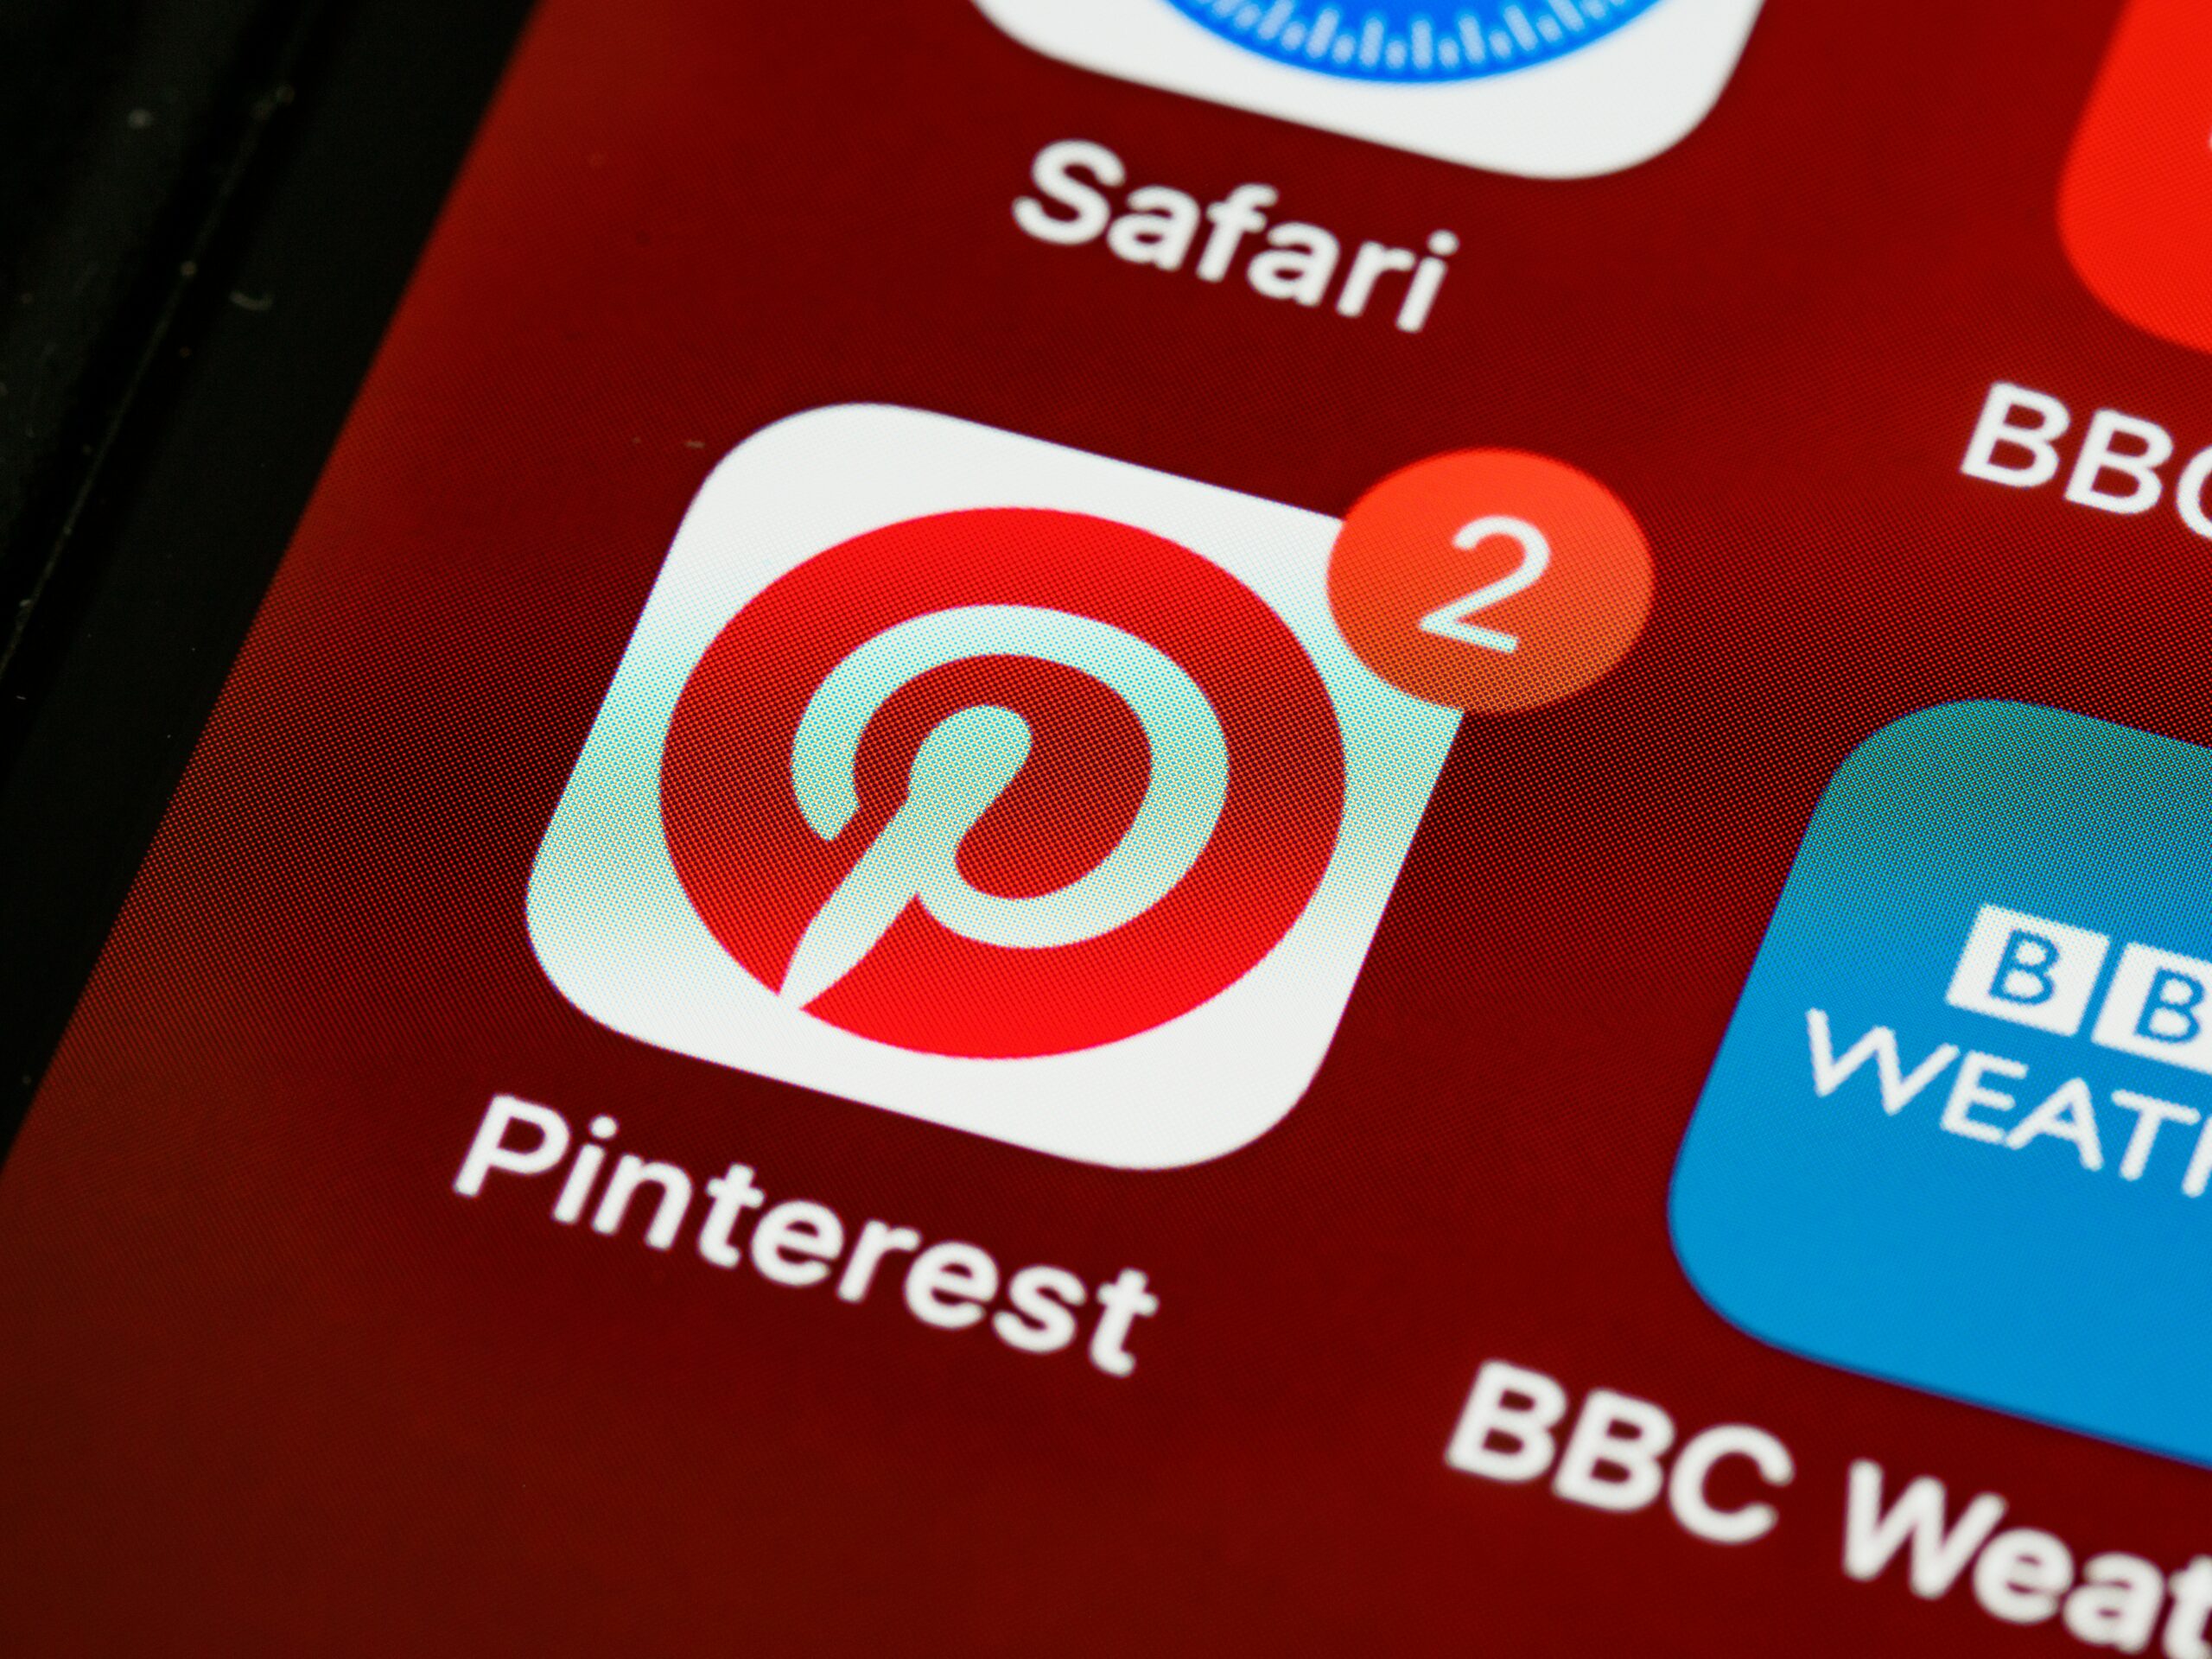 Do You Need Pinterest For Your Business in 2022?